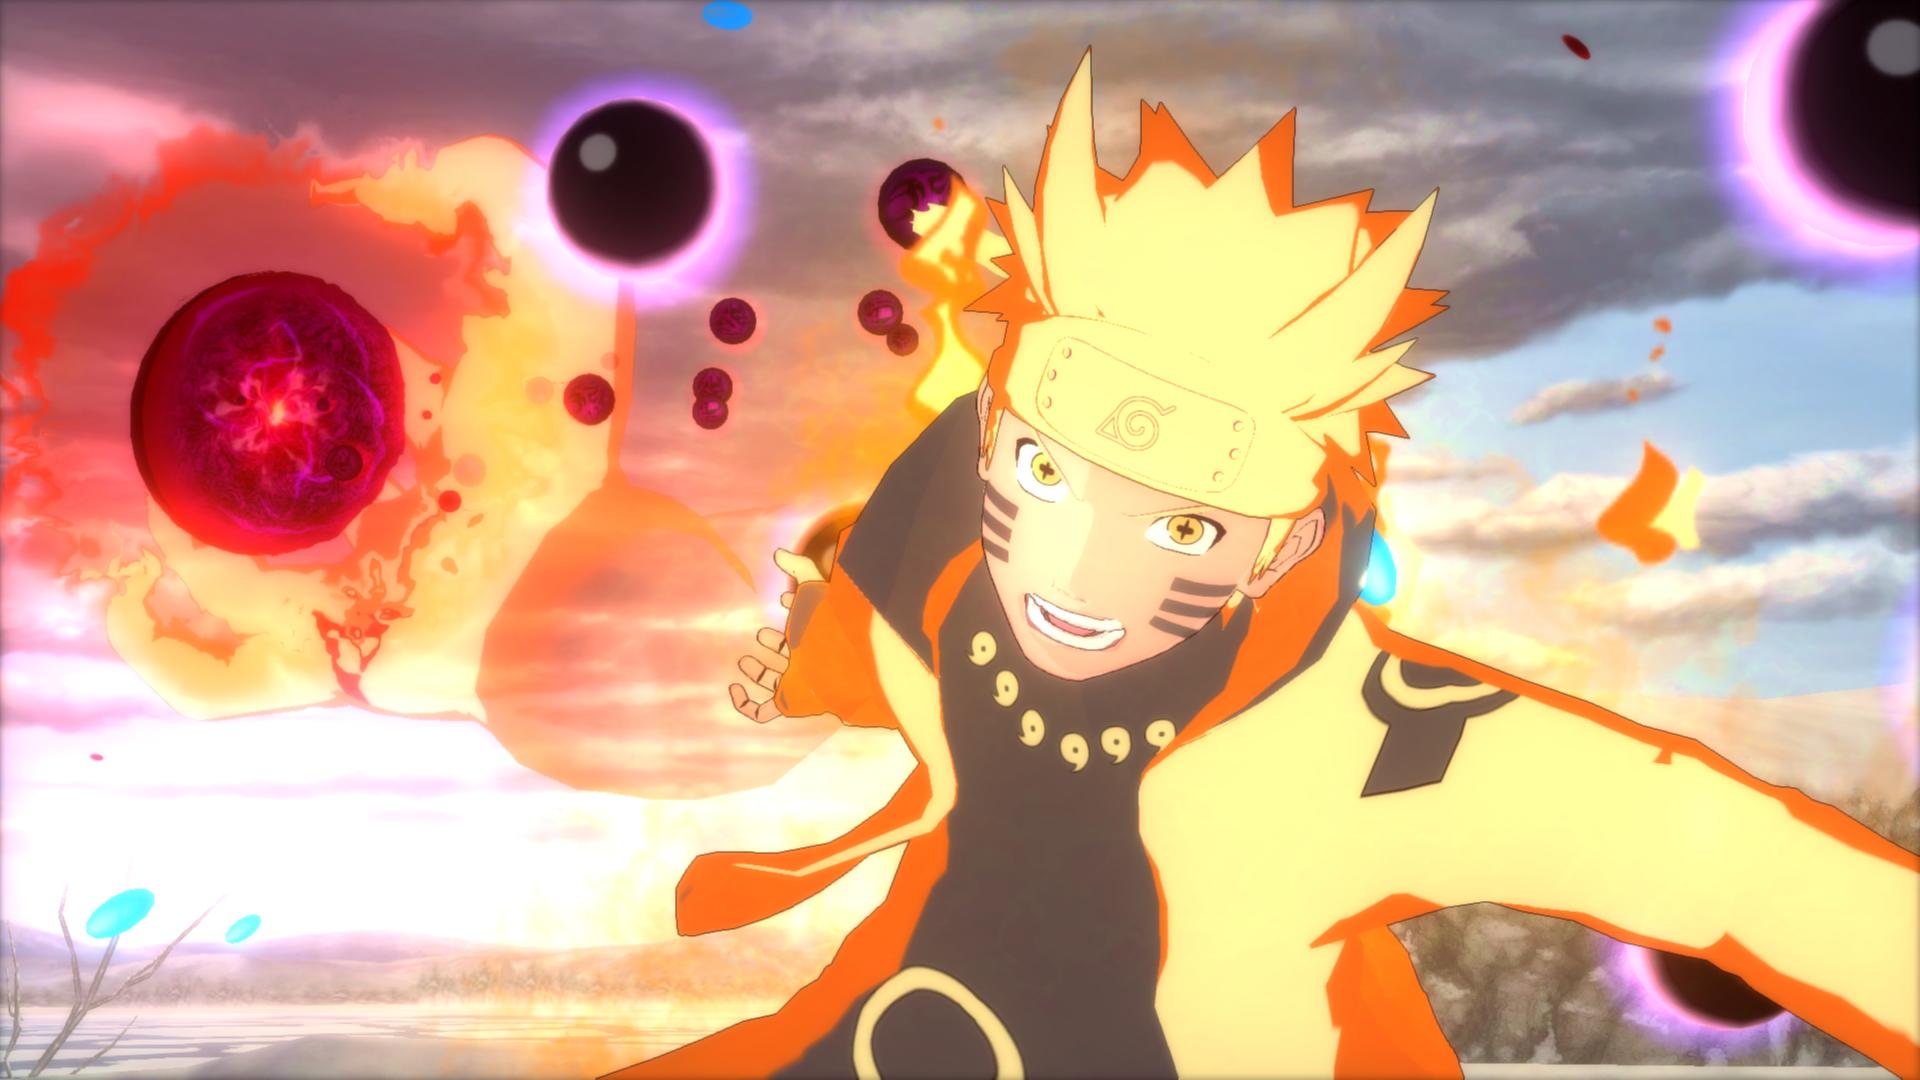 Naruto Videos: Download 4+ Free 4K & HD Stock Footage Clips - Pixabay